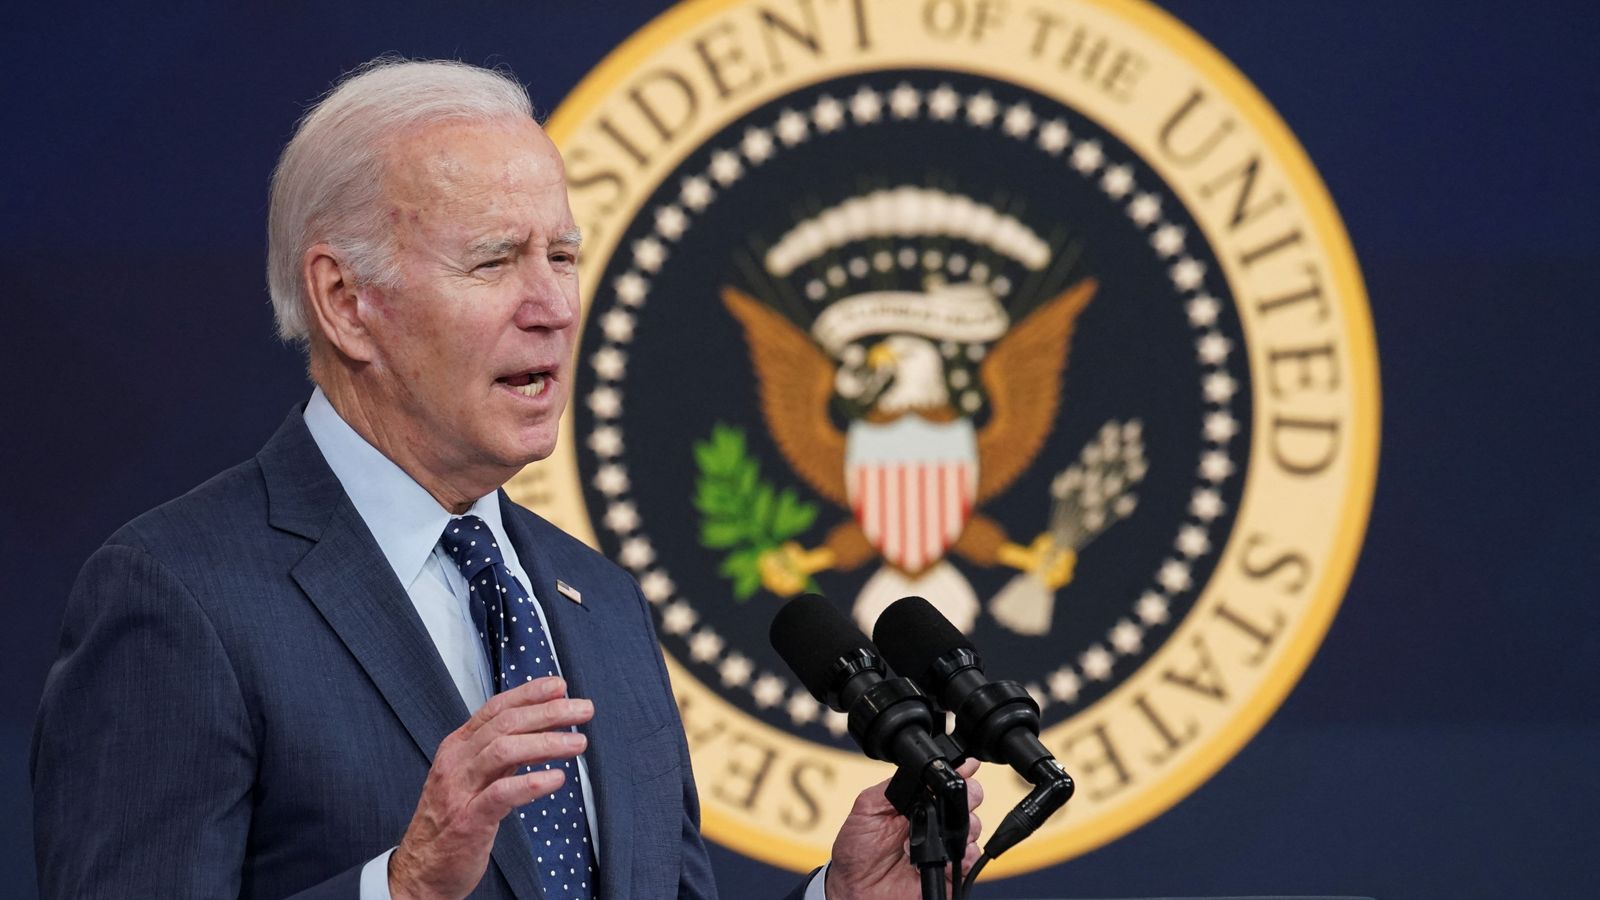 Biden: Three unidentified objects shot down by US 'most likely' linked to private companies